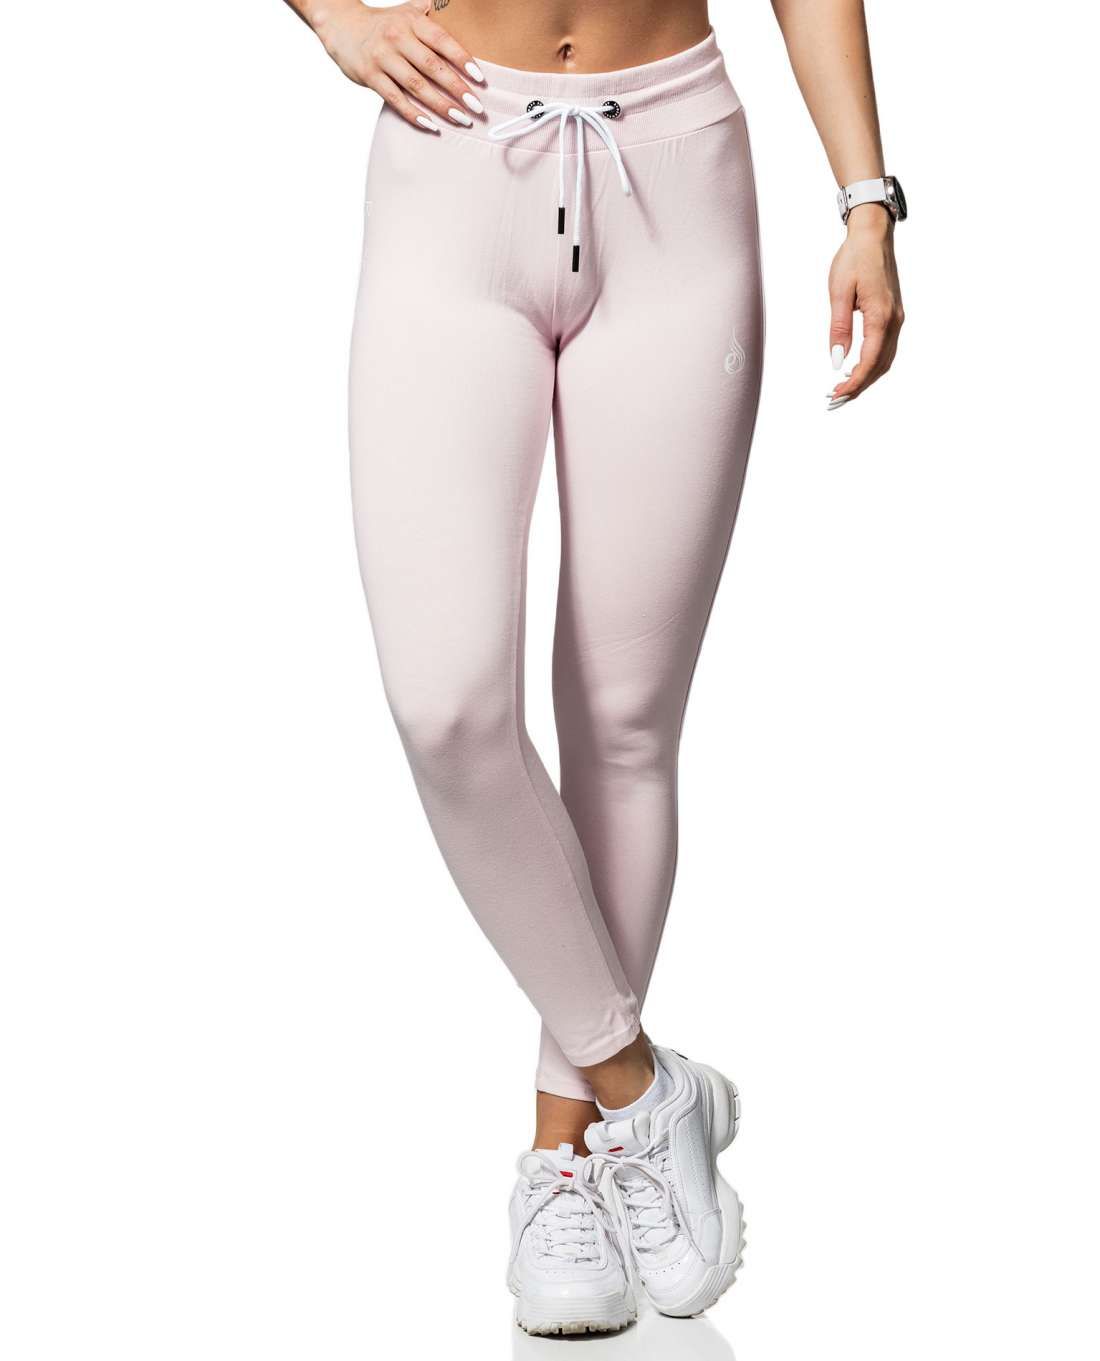 BSX High Waisted Leggings Baby Pink Ryderwear